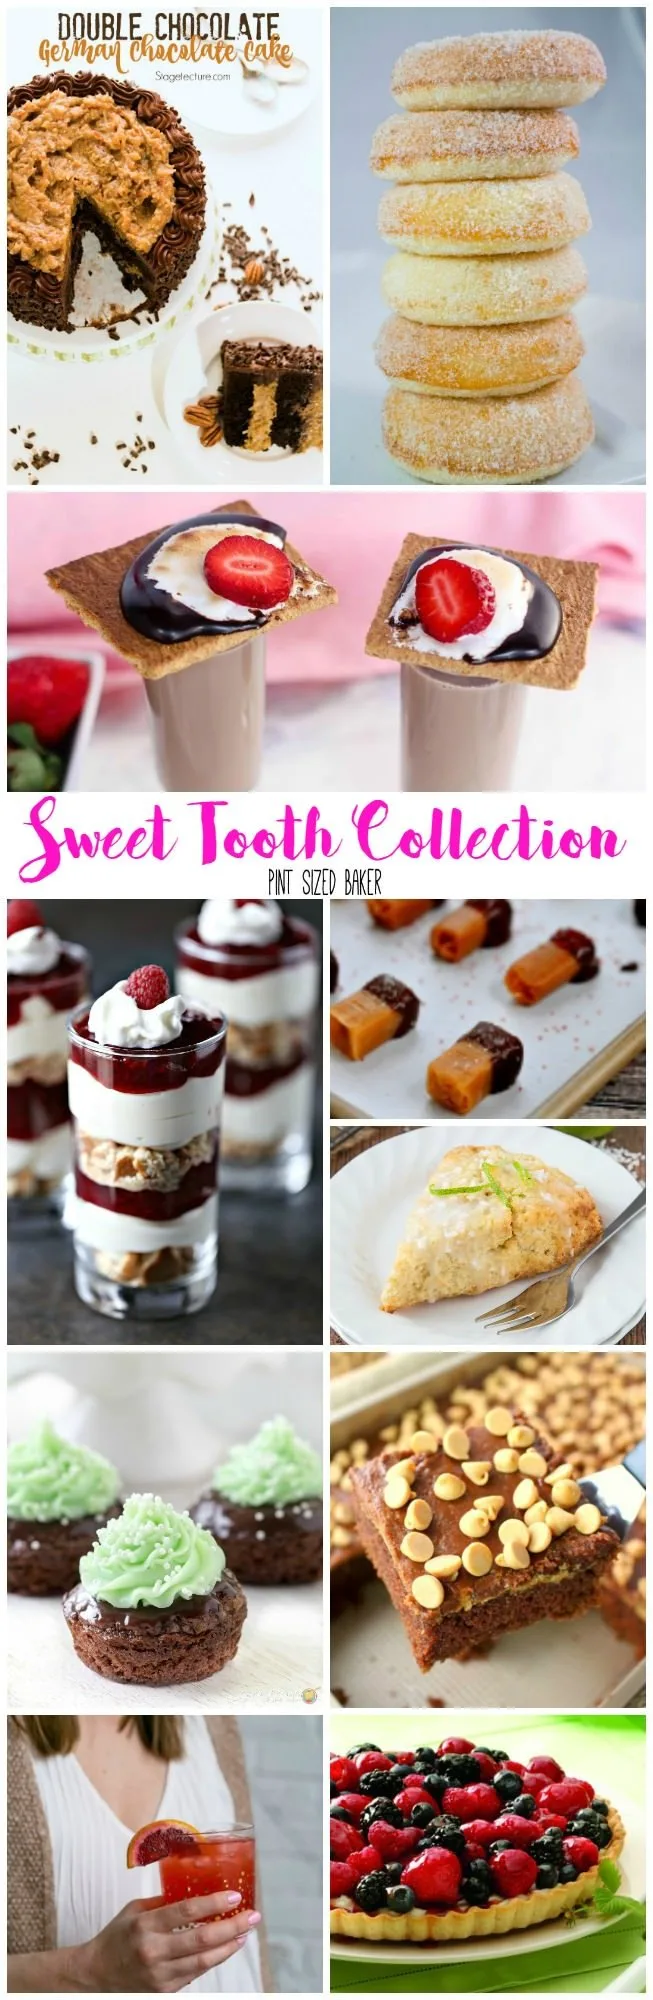 A great Sweet Tooth Collection! 10 recipes for amazing treats for breakfast, snack time, and dessert!